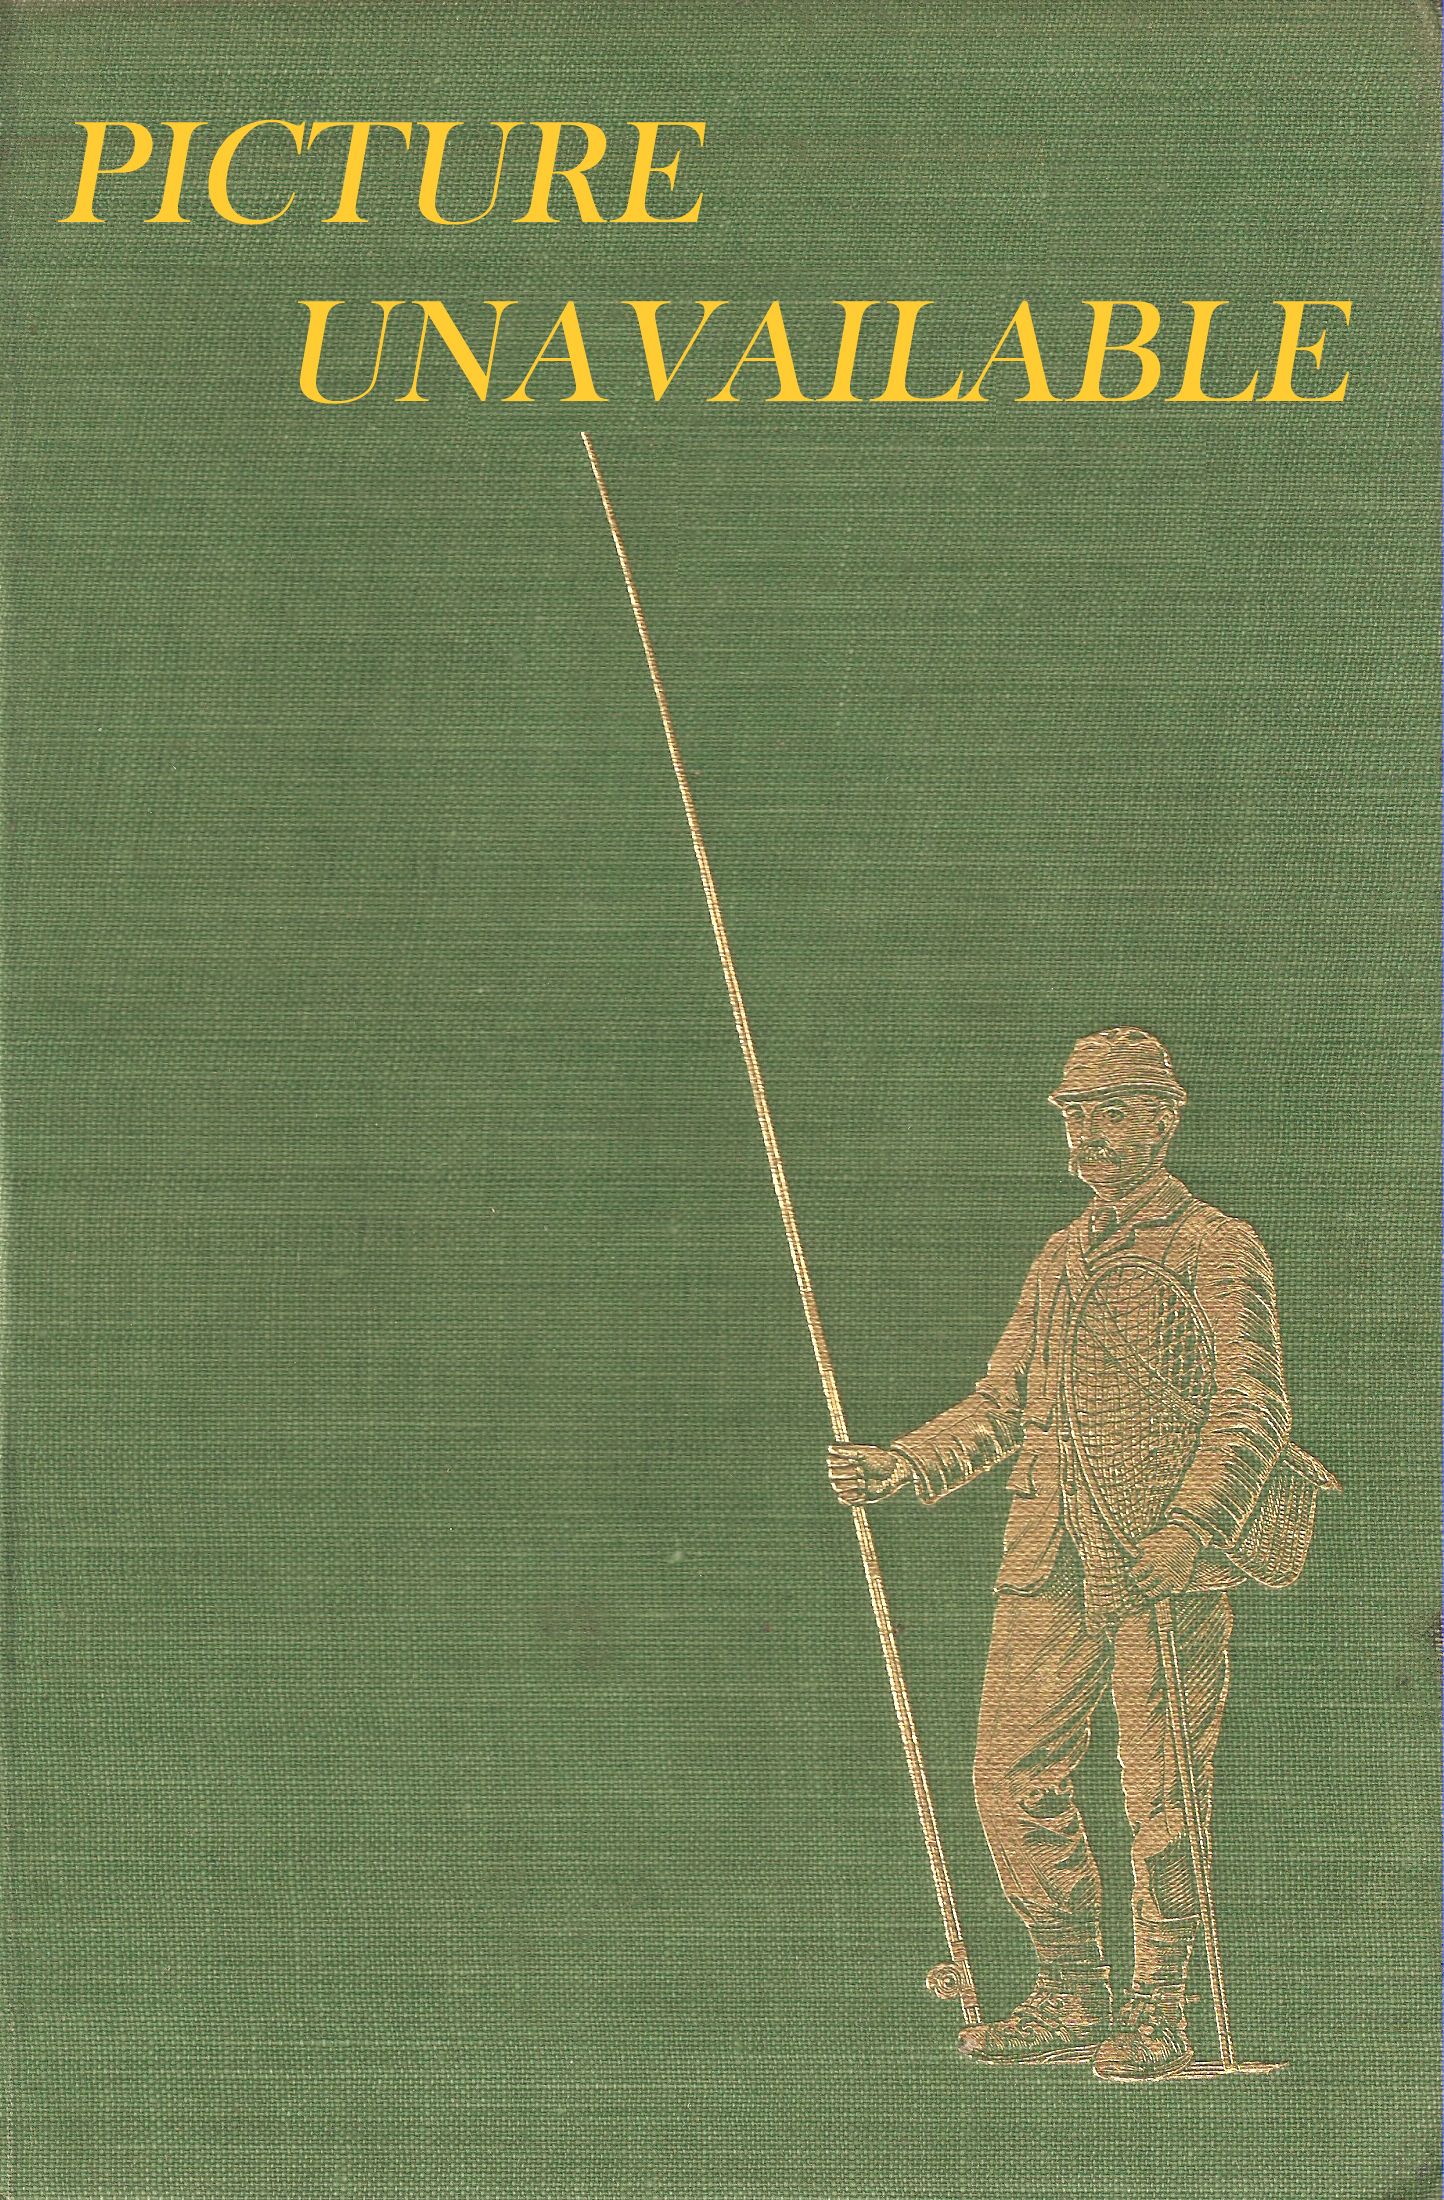 THE AMATEUR KEEPER. By Archie Coats. Field Sports Handbooks series.